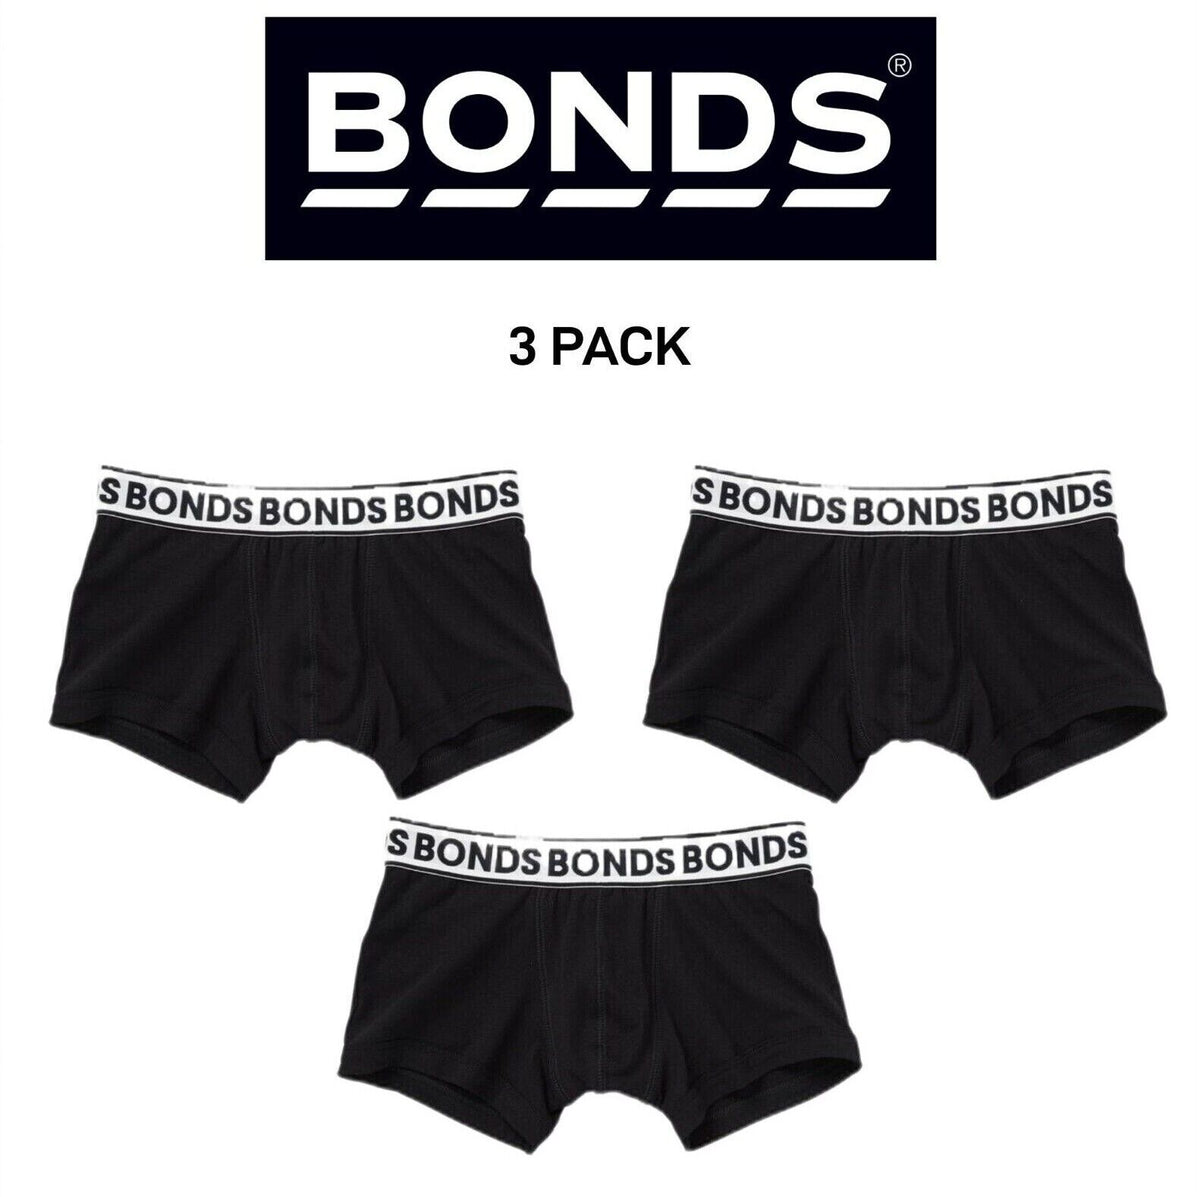 Bonds Boys New Era Fit Trunk Very Soft Comfortable Wide Waistband 3 Pack UYB71A